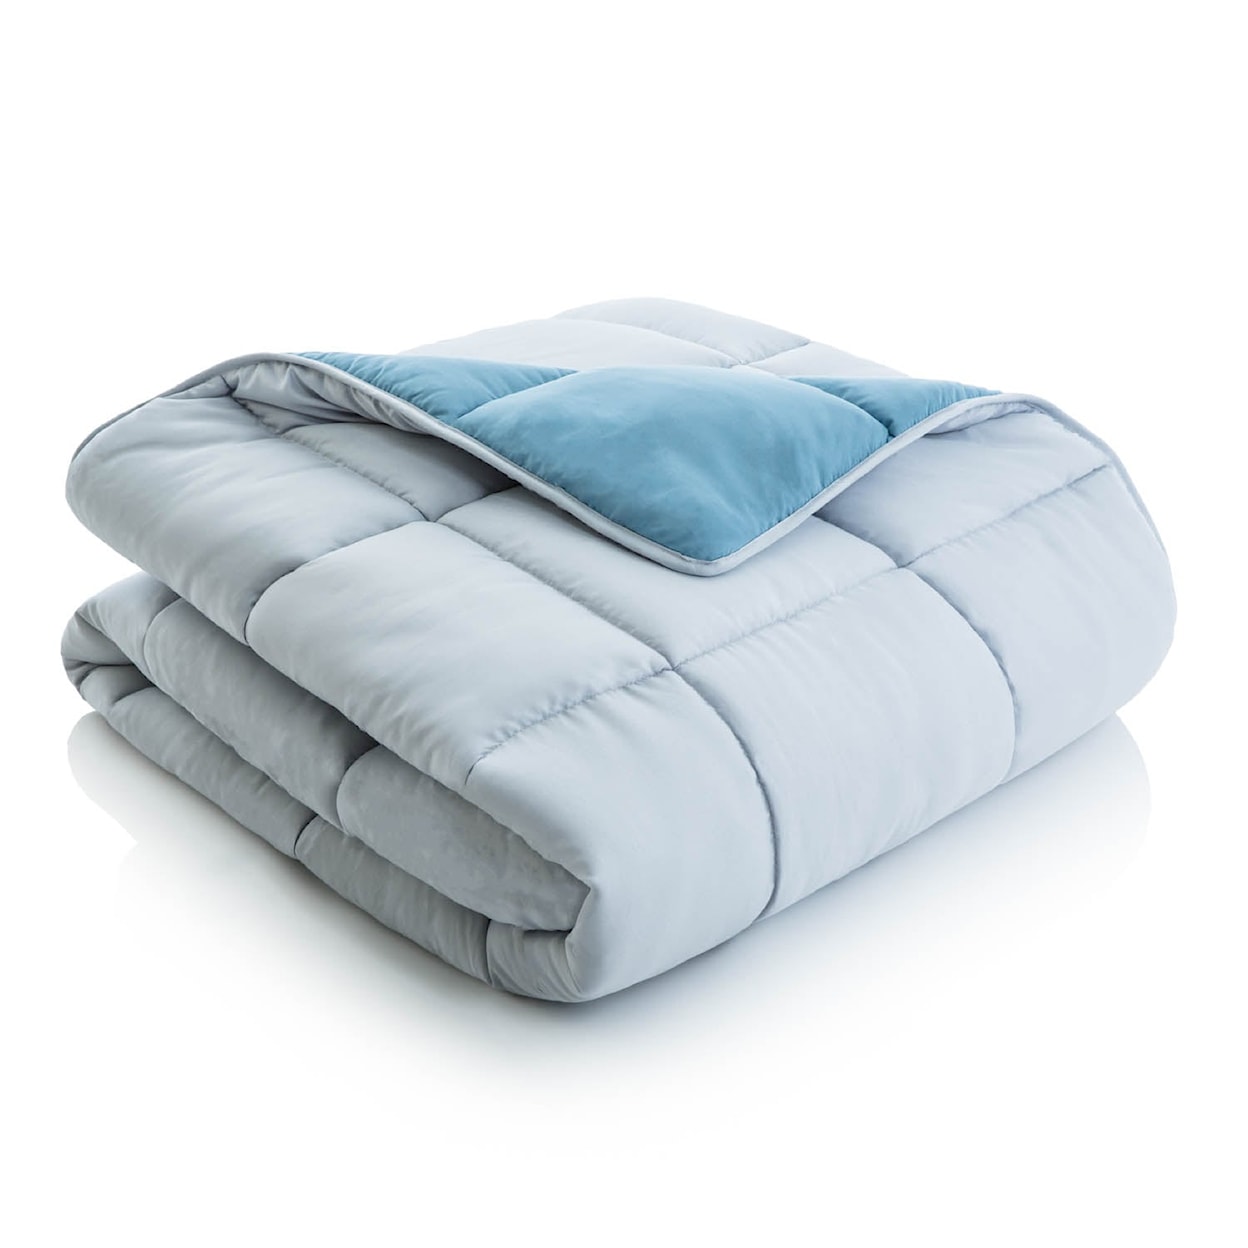 Malouf Reversible Bed in a Bag Twin White Reversible Bed in a Bag